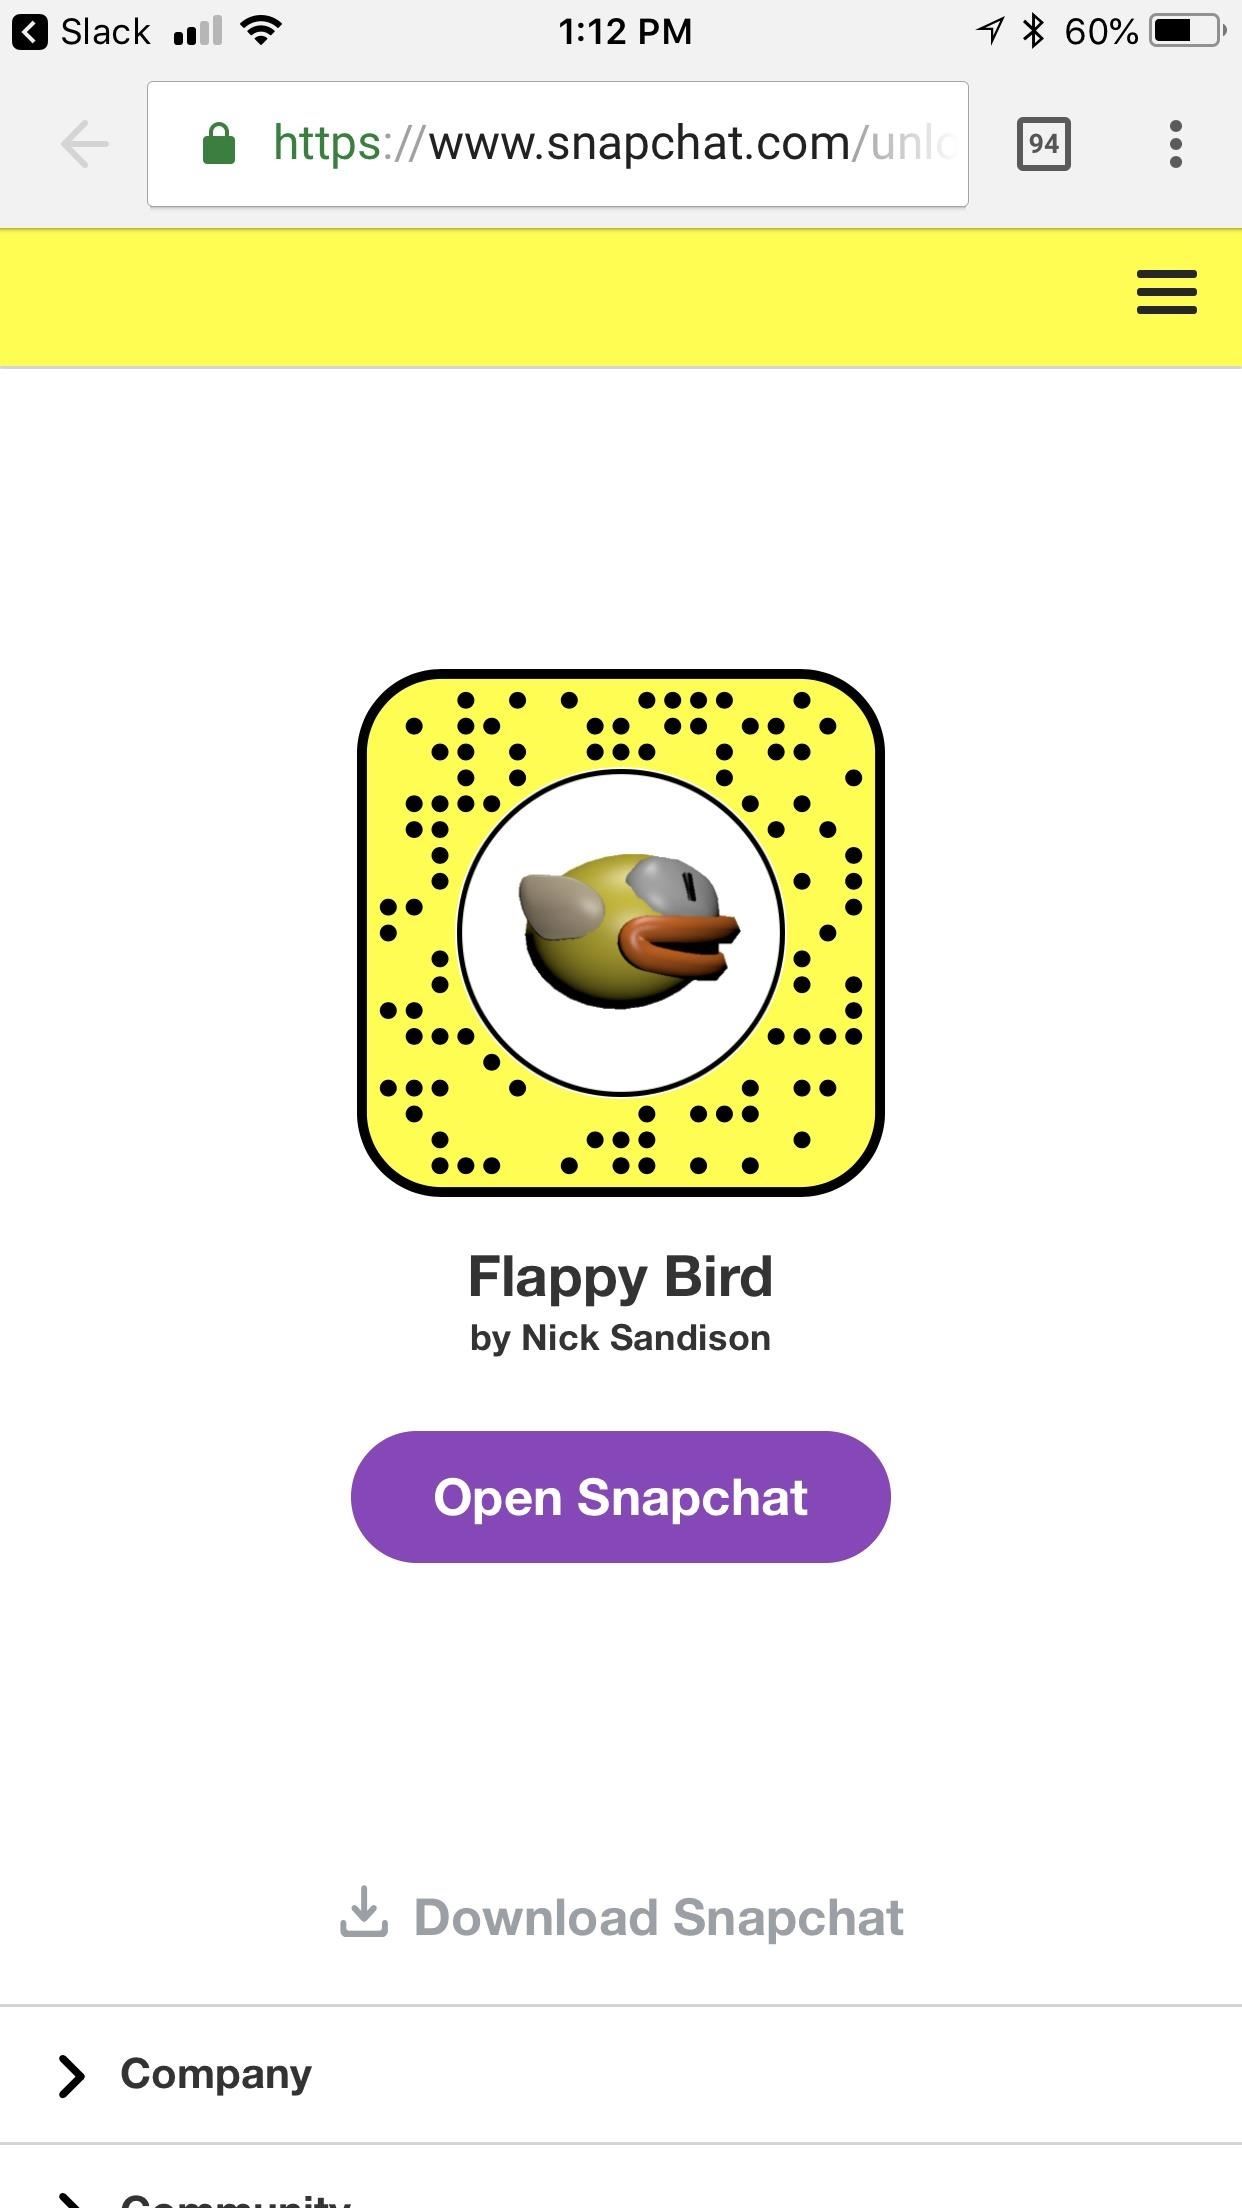 Try These 5 Hot New Snapchat Lenses — The Simpsons, Playable Flappy Bird & More